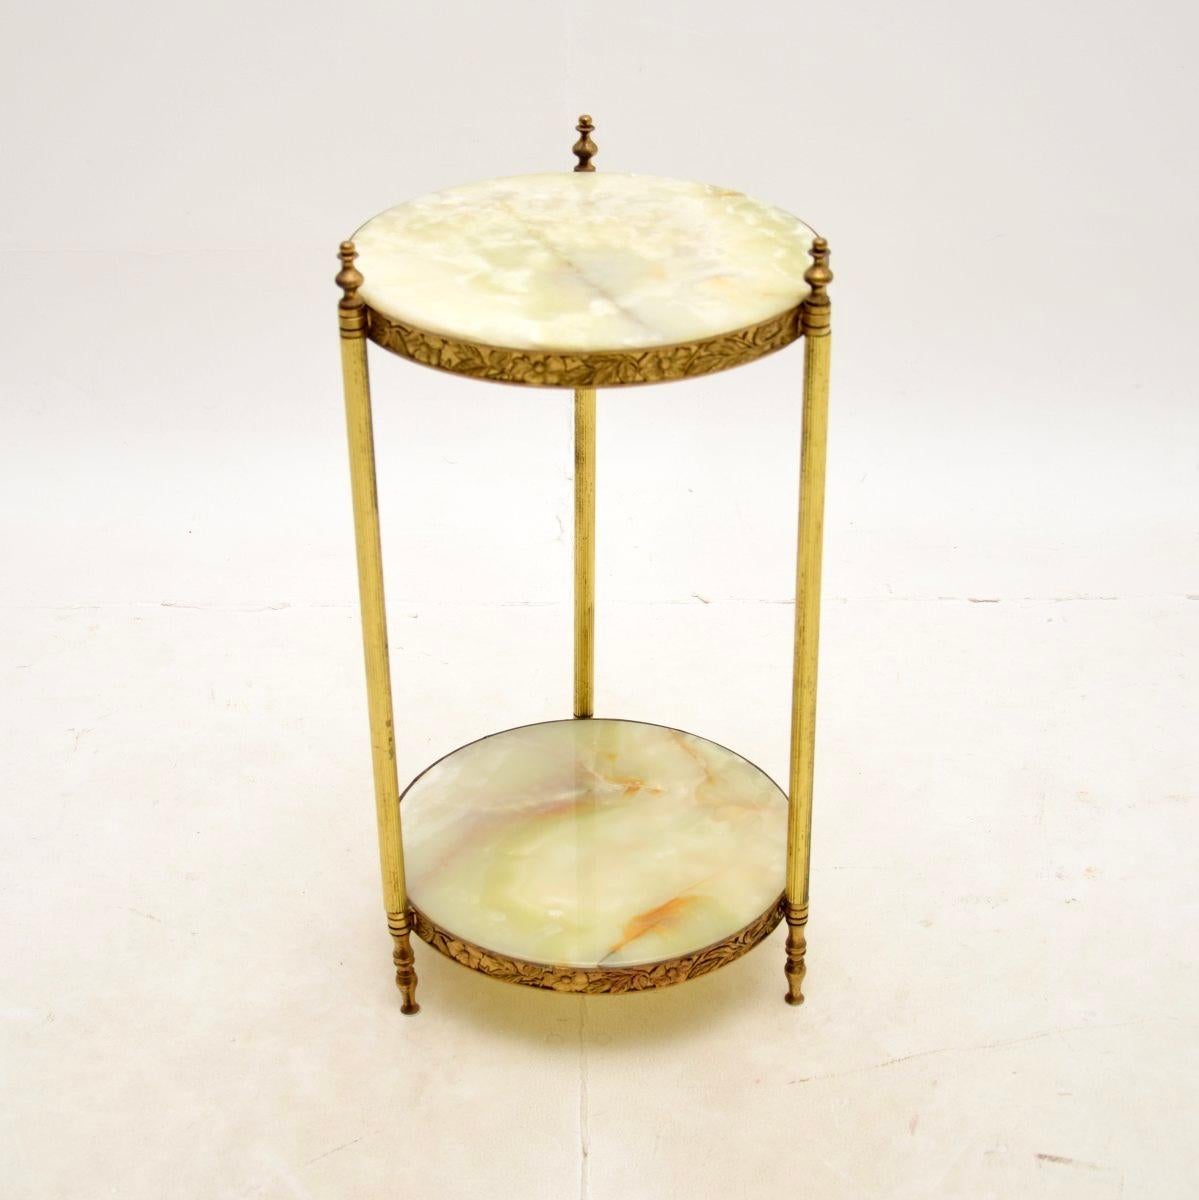 A beautiful antique French brass and onyx side table. This was made in France, it dates from around the 1930’s.

The quality is superb, the brass frame has fine and intricate details around the edges, it stands on fluted legs with finials at the